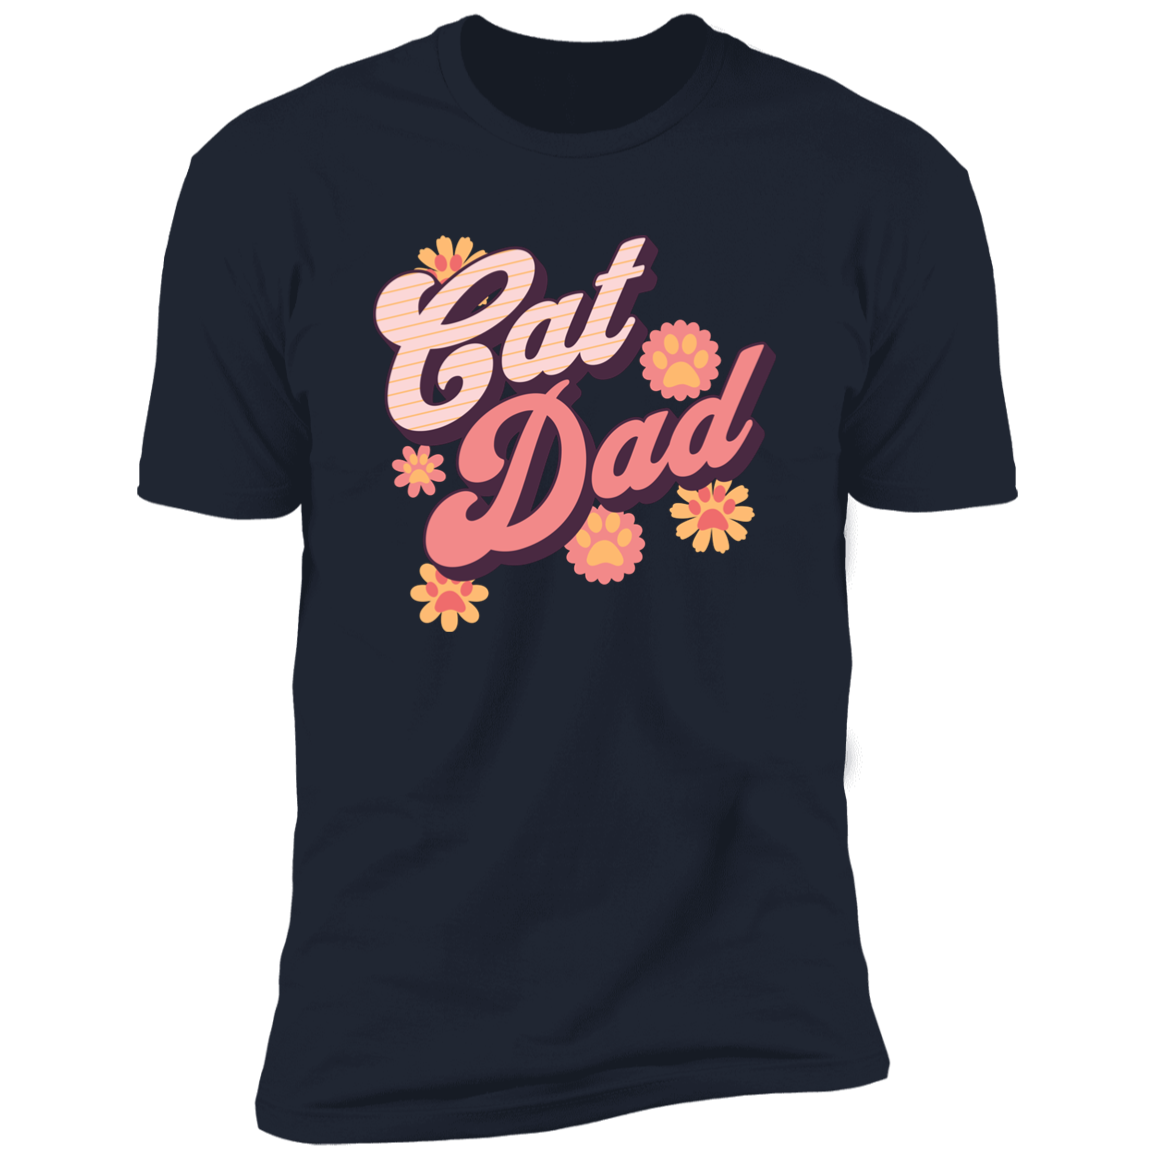 Cat Dad Retro T-shirt, Cat Dad Shirt for humans, in navy blue